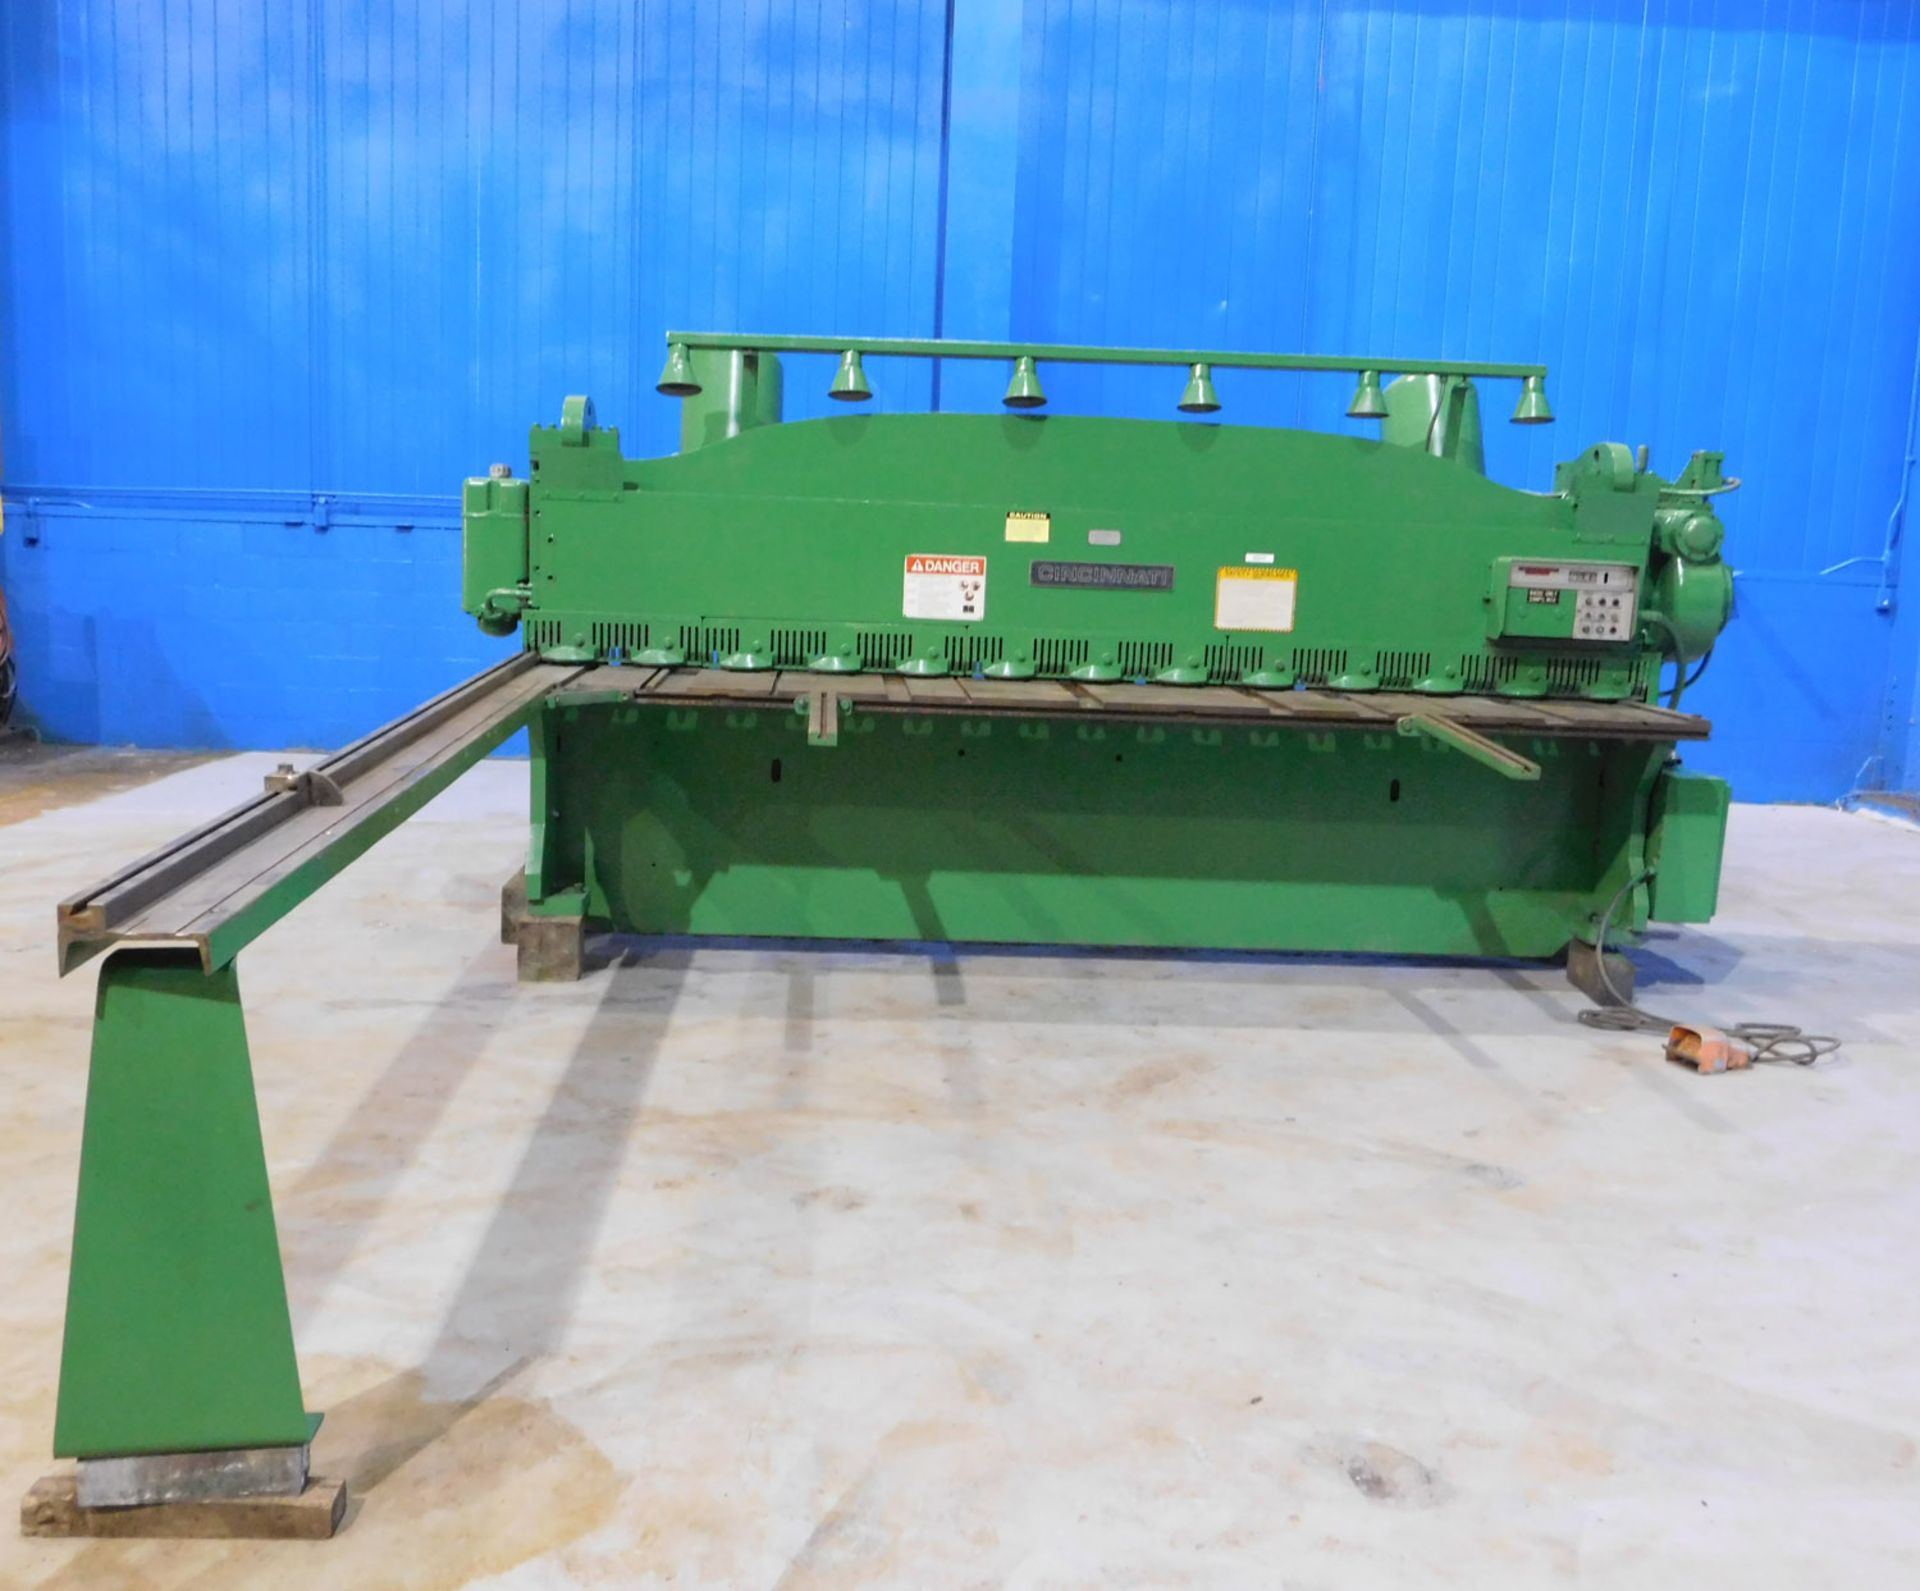 Cincinnati Power Shear, 1/4" x 12', Mdl: 2CC12, S/N: 44341 (5991P) (Located In Painesville, OH)